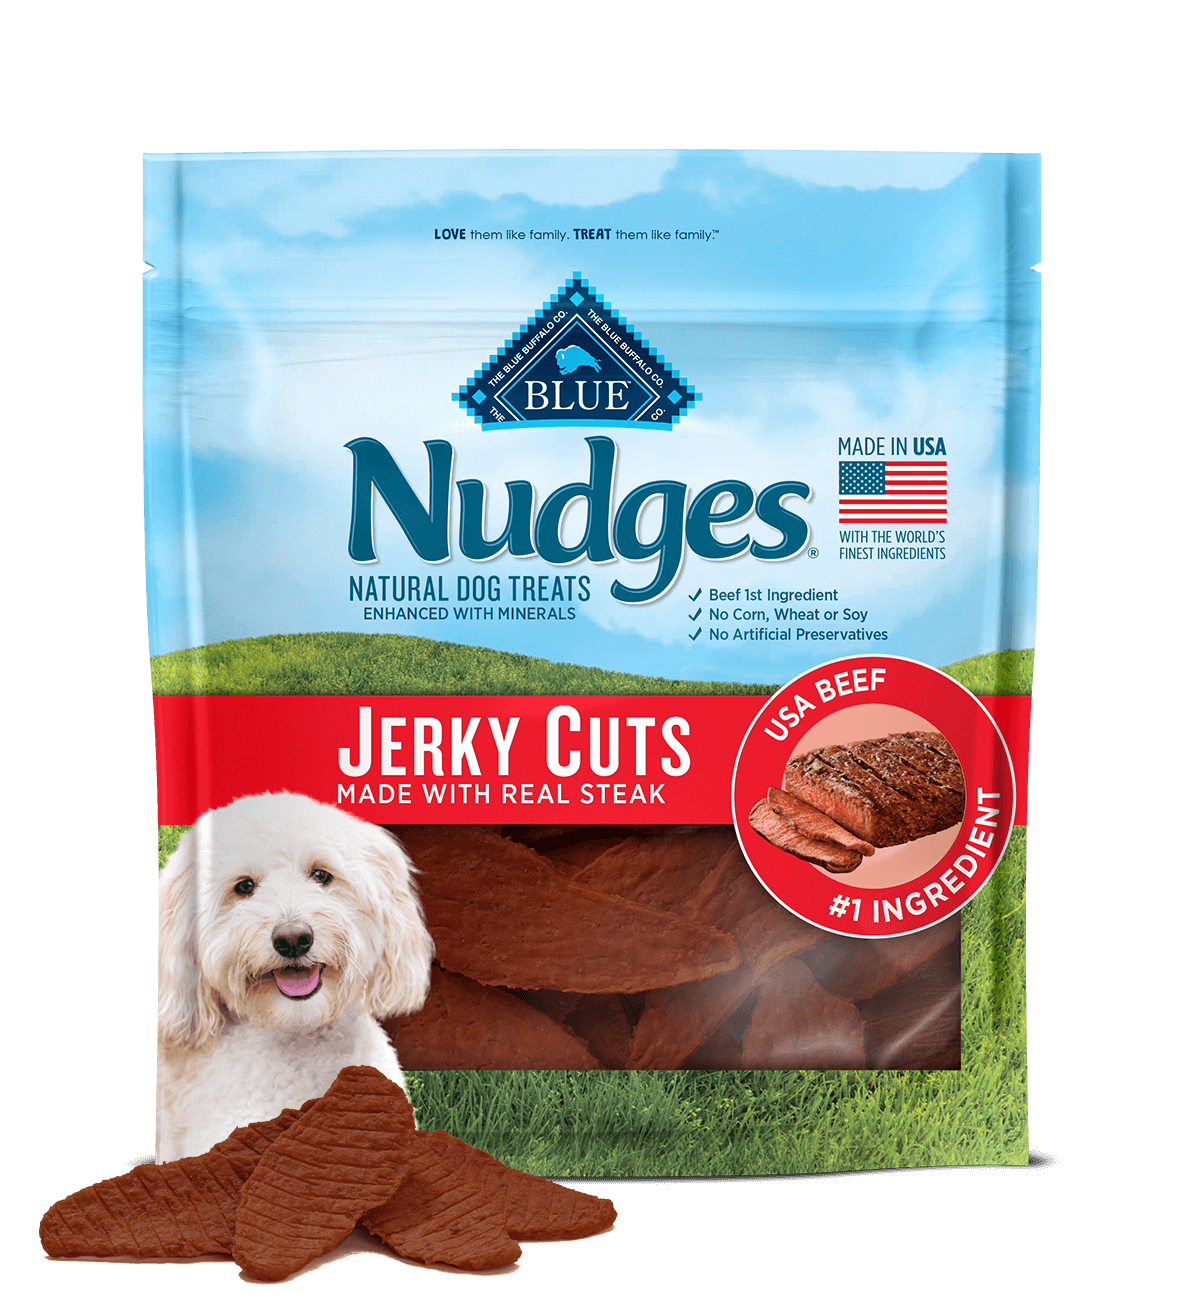 blue nudges protein-packed steak jerky cuts dog treats